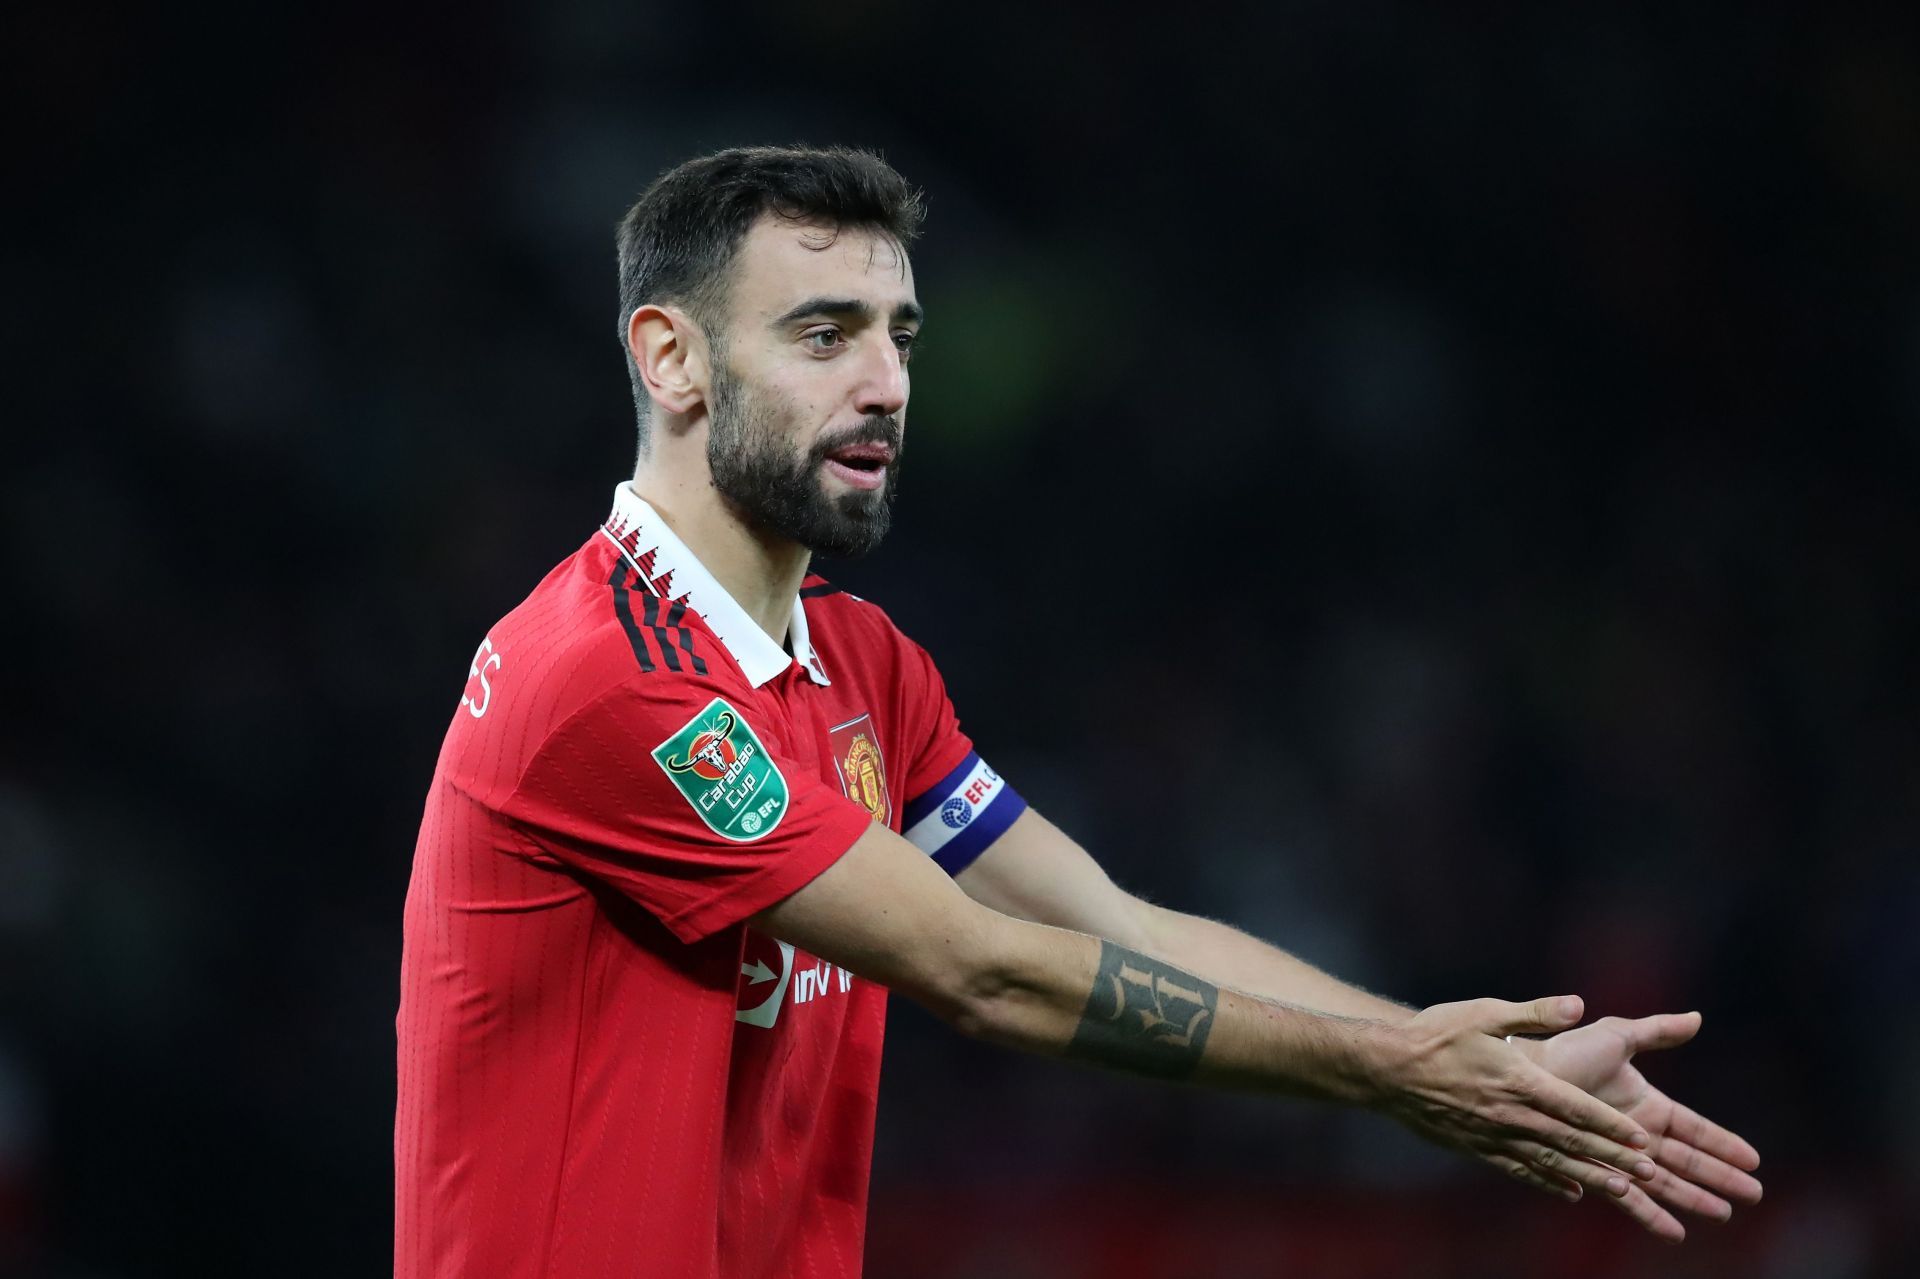 Bruno Fernandes spoke about playing with Raphinha once again.